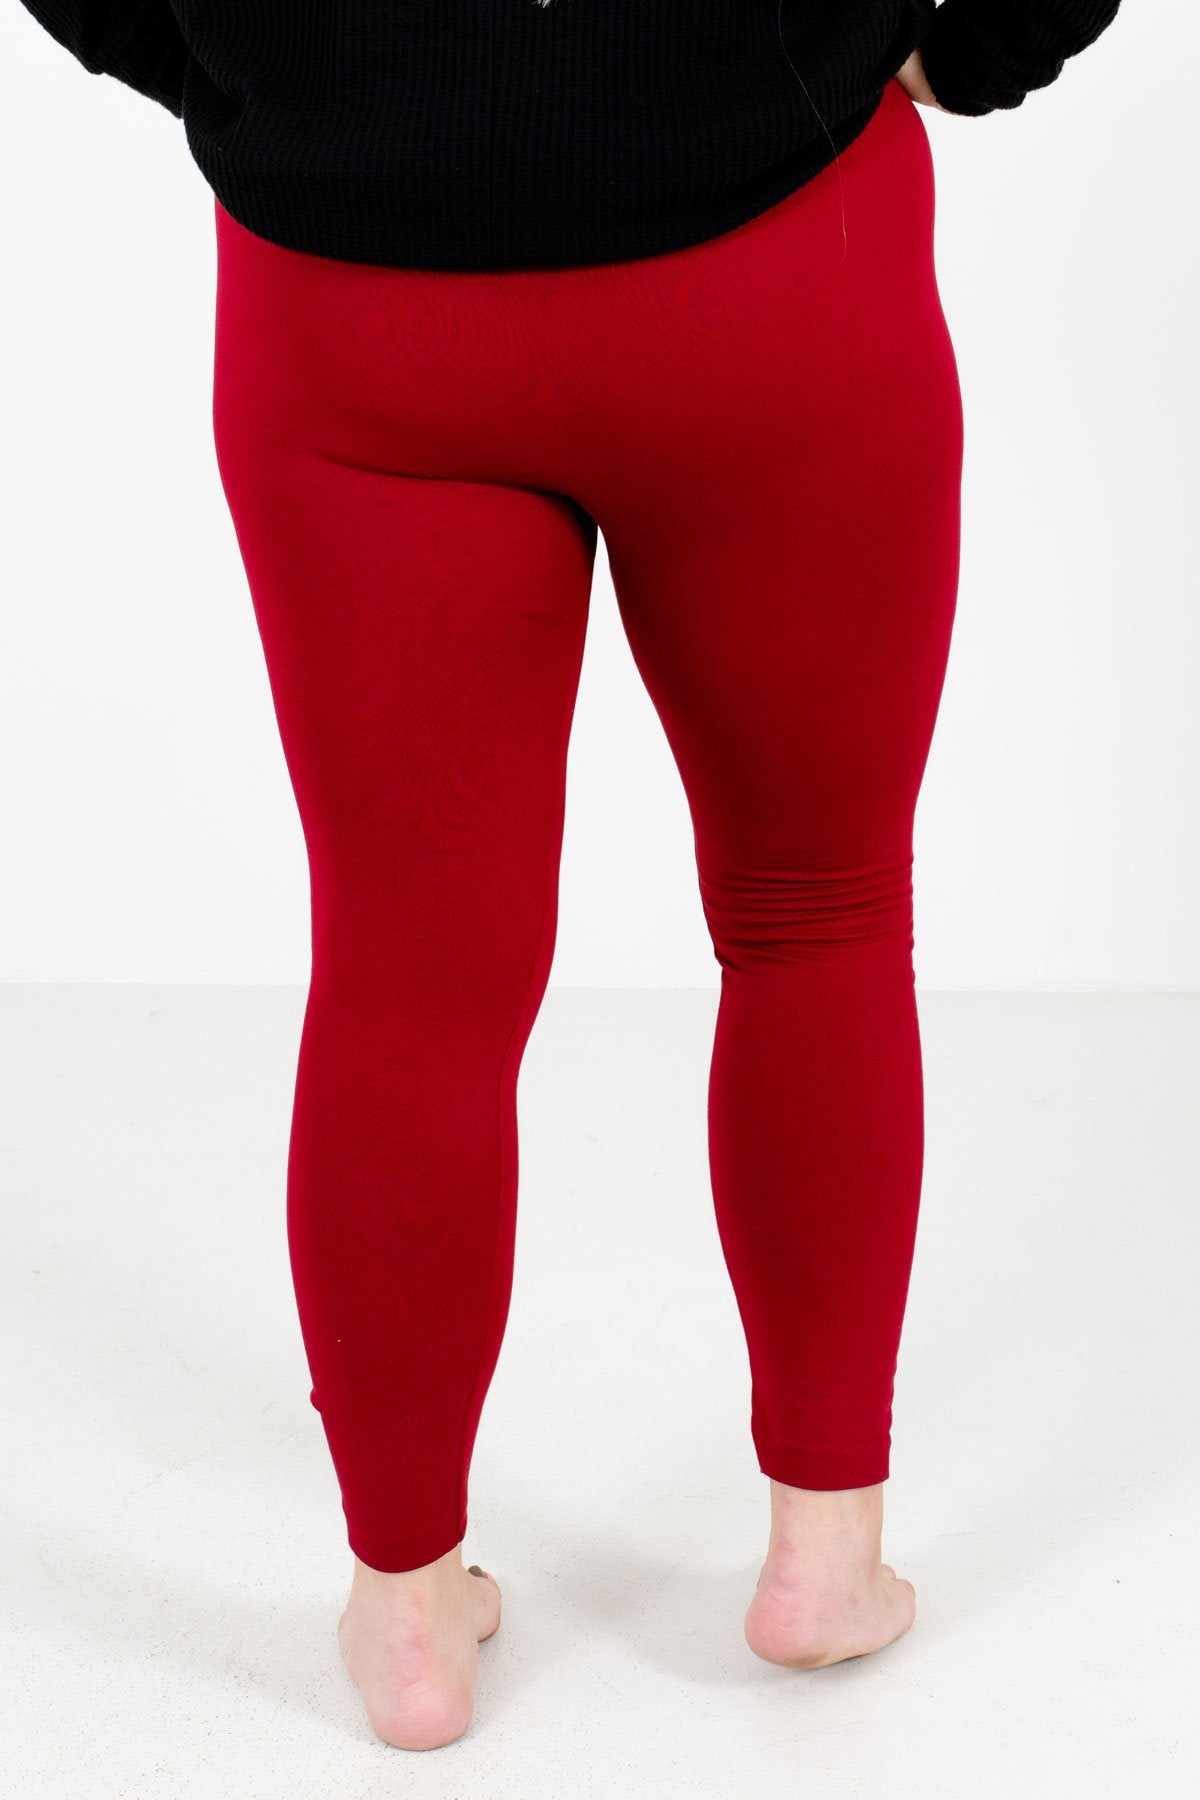 Fleece Lined Leggings Women Size 18 Thick Red Leggings Ruched